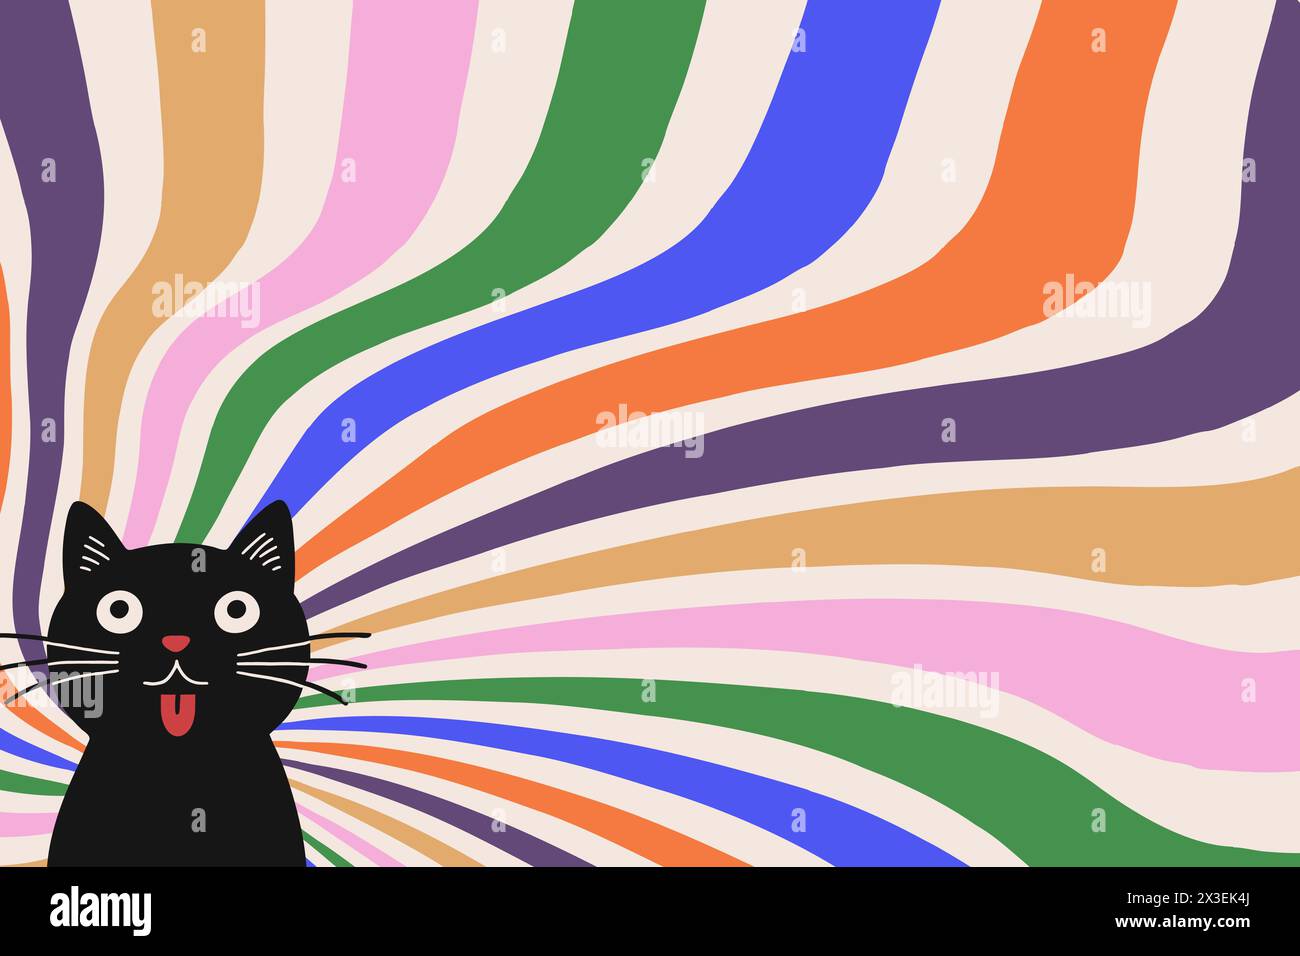 Groovy abstract rainbow swirl background with cute black cat. Retro vector design in 1960-1970s style. Vintage sunburst backdrop. Stock Vector